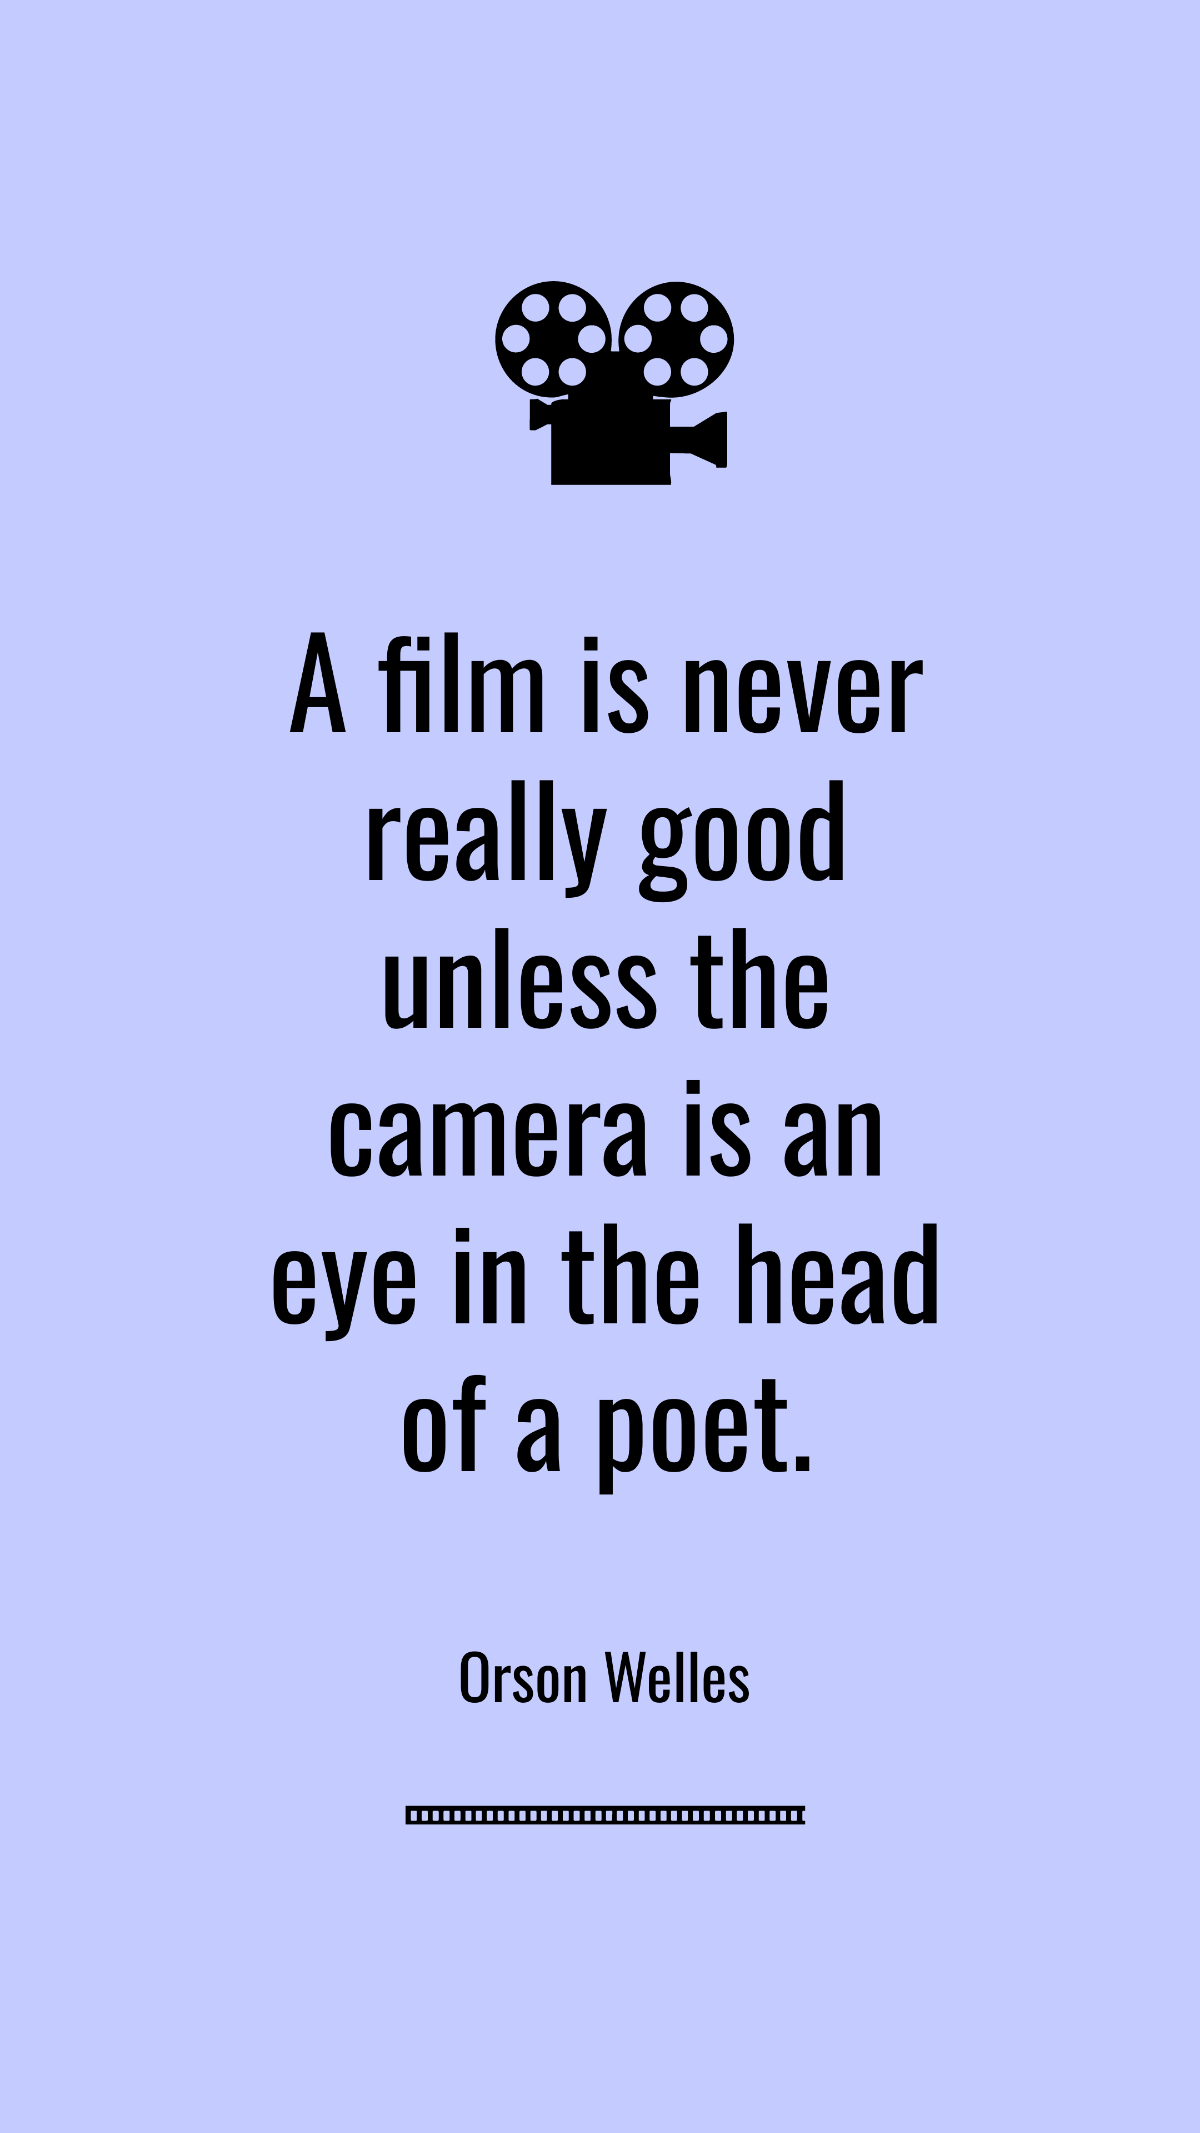 Orson Welles - A film is never really good unless the camera is an eye in the head of a poet. Template